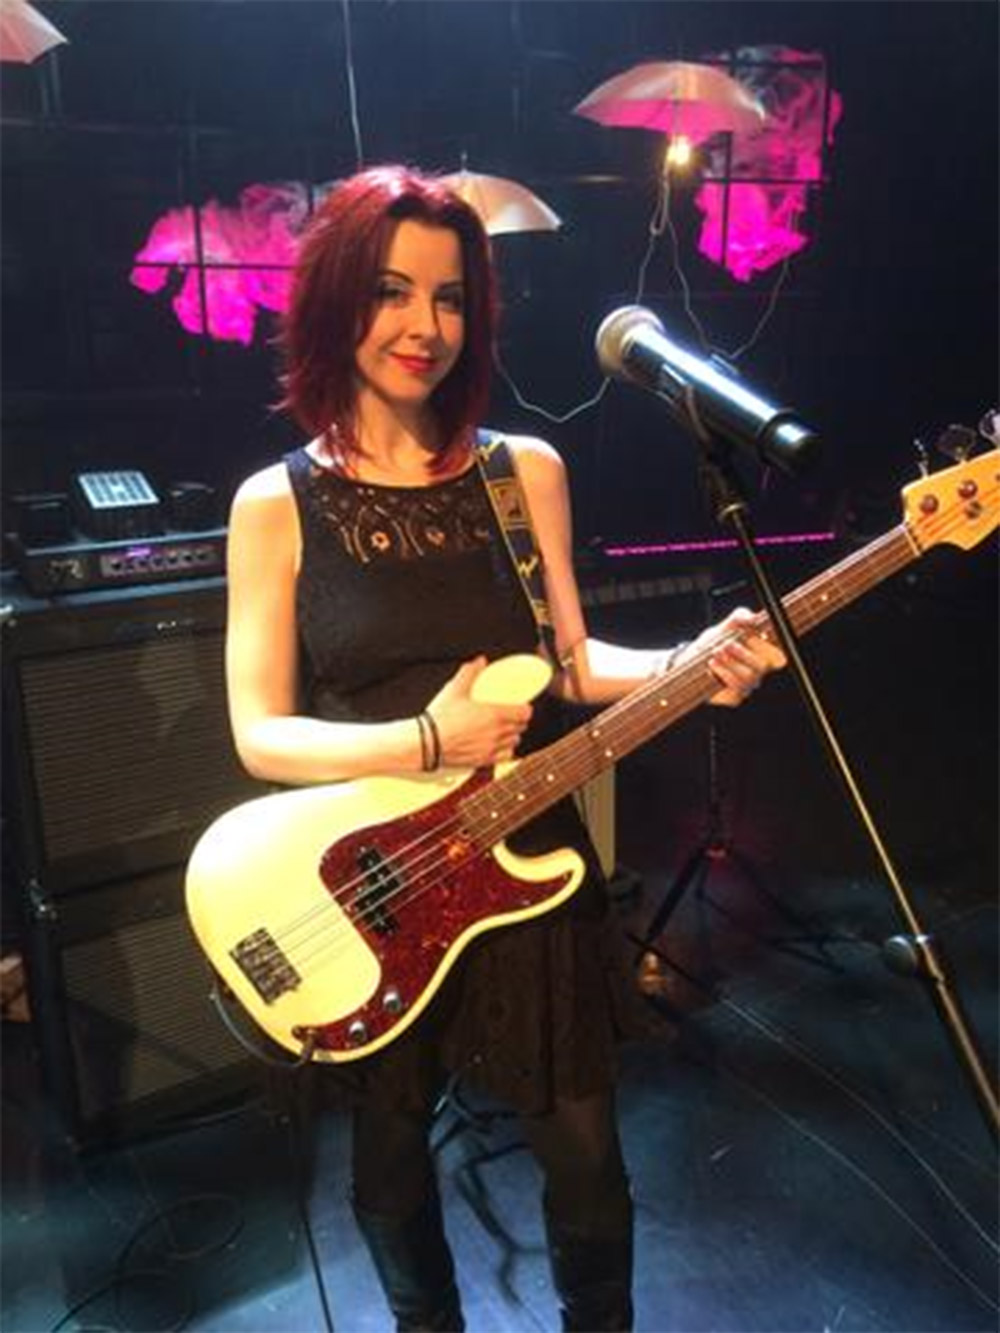 Jenn Oberle standing on stage holding a bass